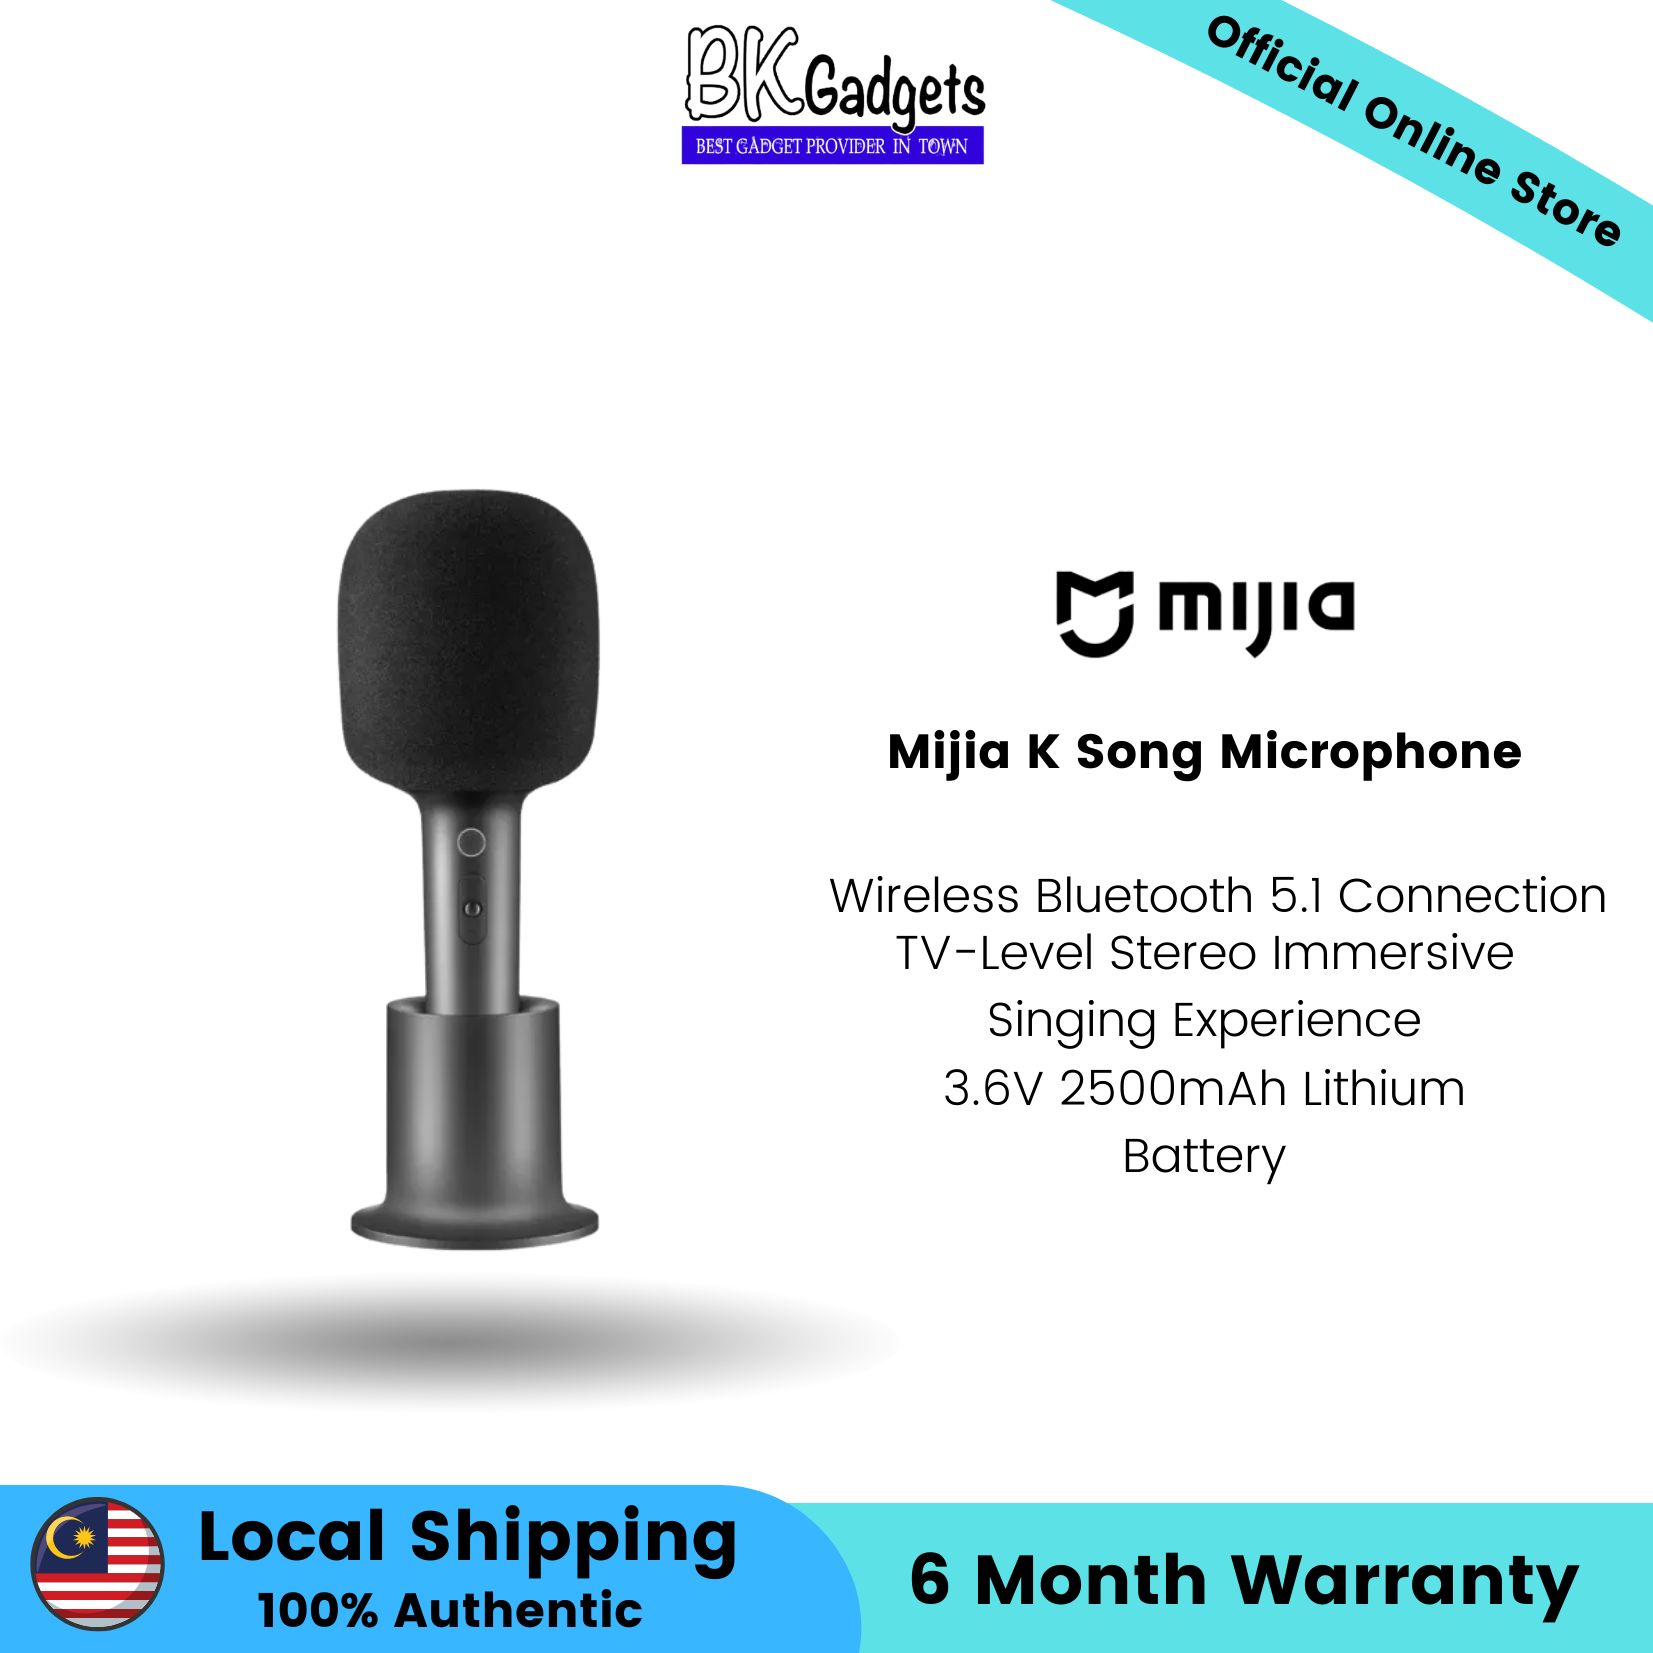 Mijia K Song Micophone - Wireless Bluetooth 5.1 Connection  TV-Level Stereo Immersive Singing Experience  3.6V 25000mAh Lithium Battery